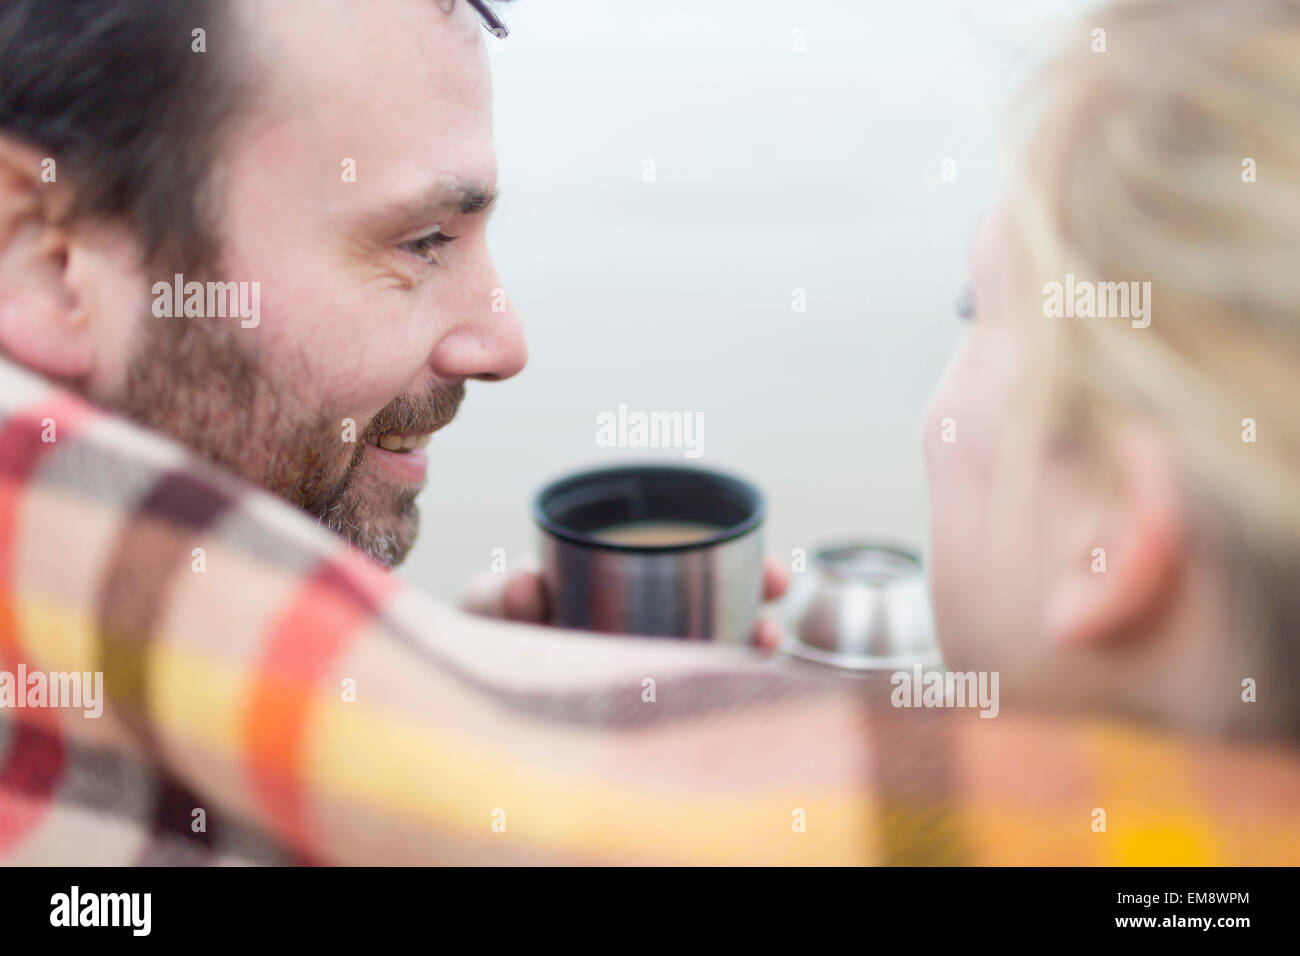 Couple on beach, drinking hot drink from drinks flask Stock Photo